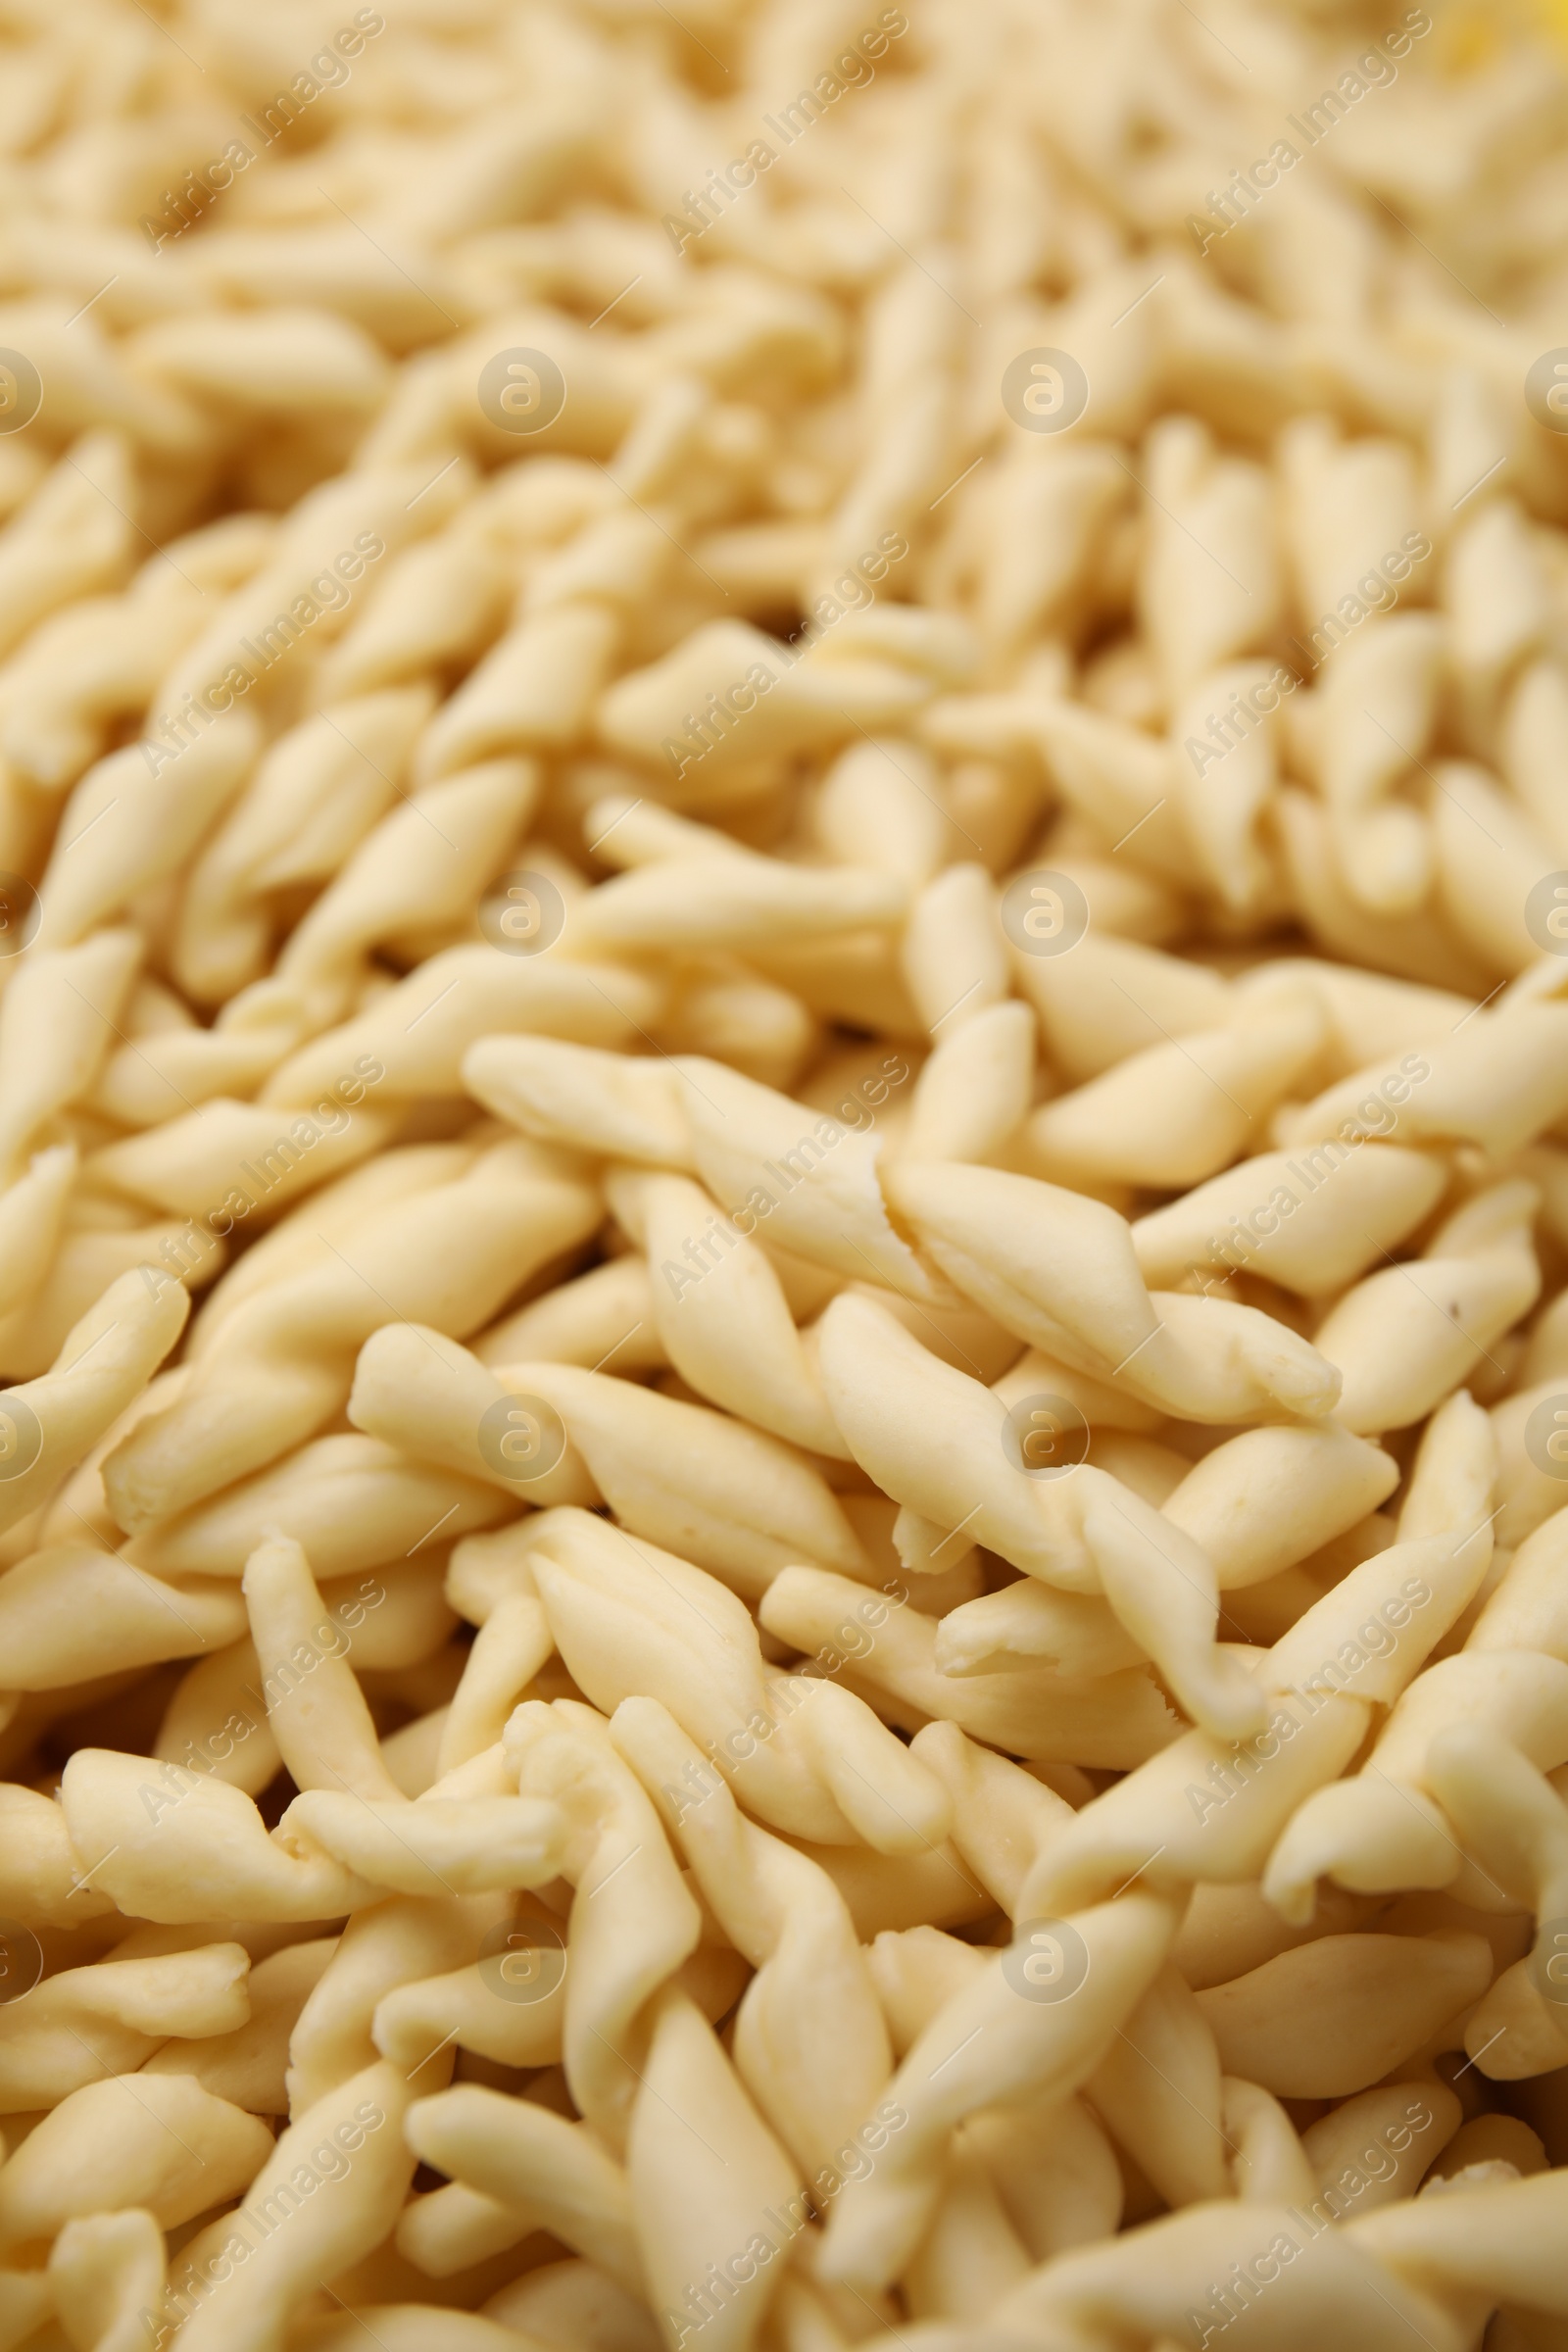 Photo of Uncooked trofie pasta as background, closeup view